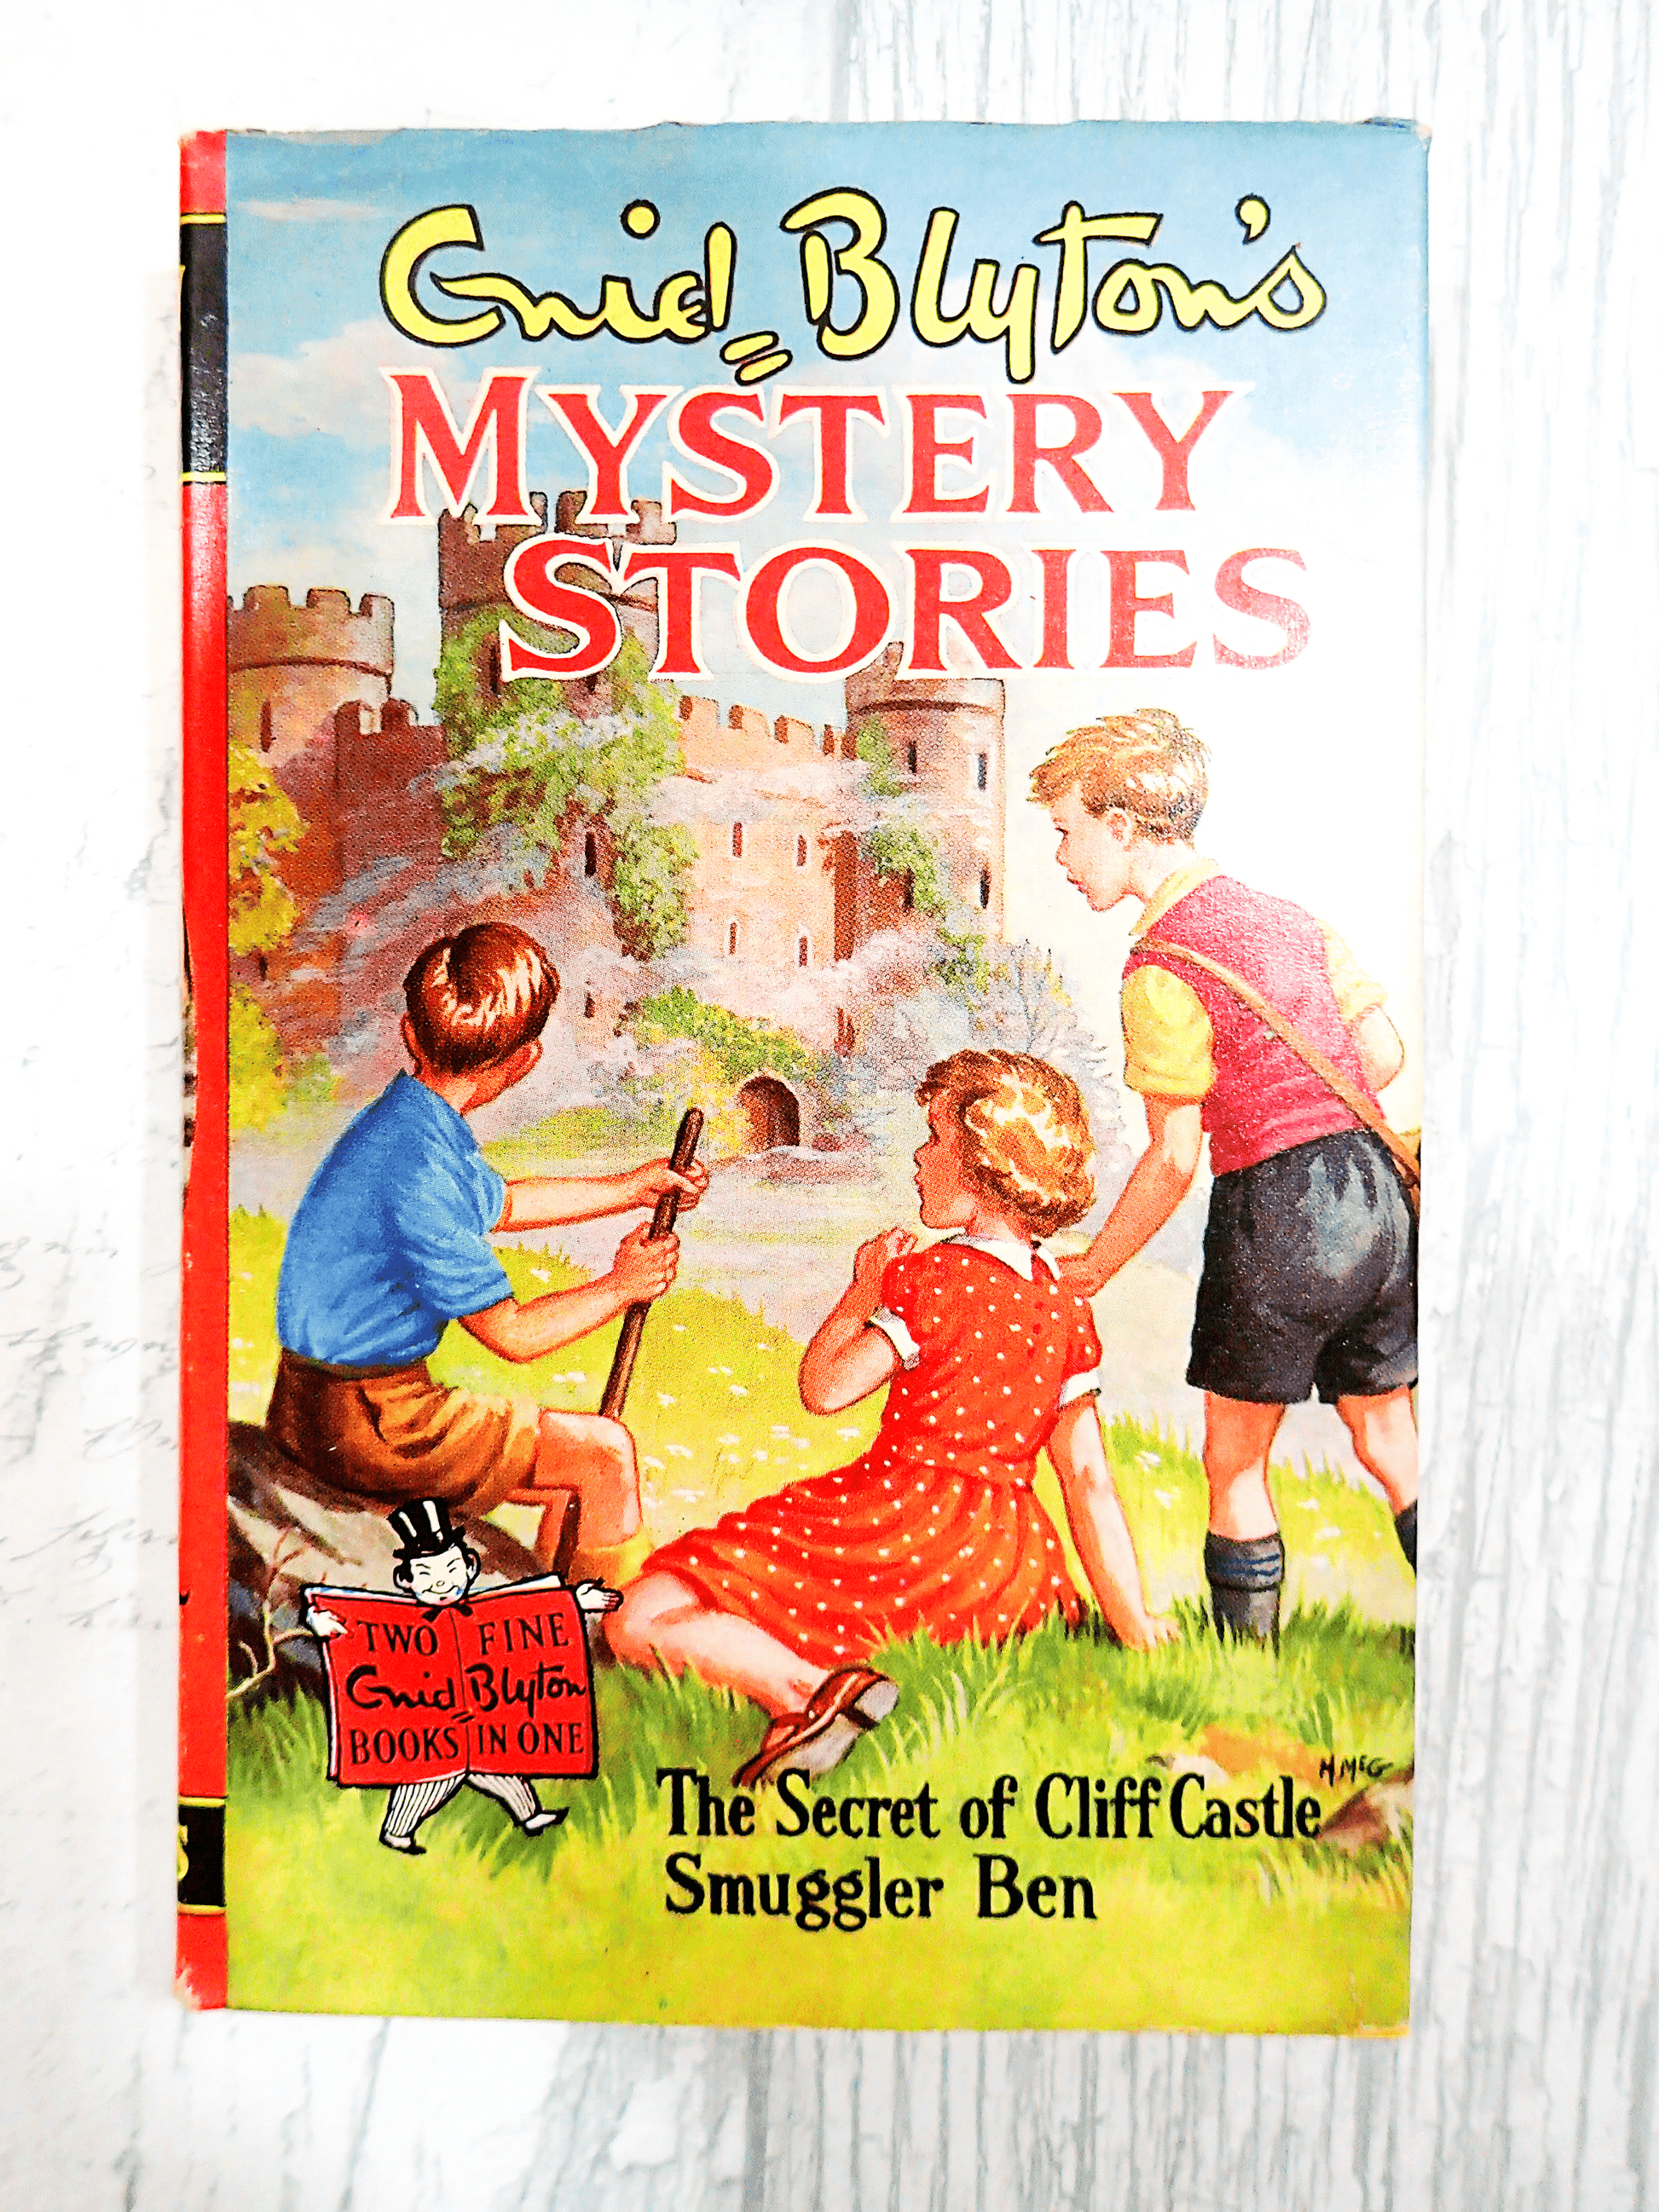 Front cover of Mystery Stories by Enid Blyton Vintage Children's Book Smuggler Ben Secret Cliff Castle 1960's showing three children in front of a castle against a light background. 